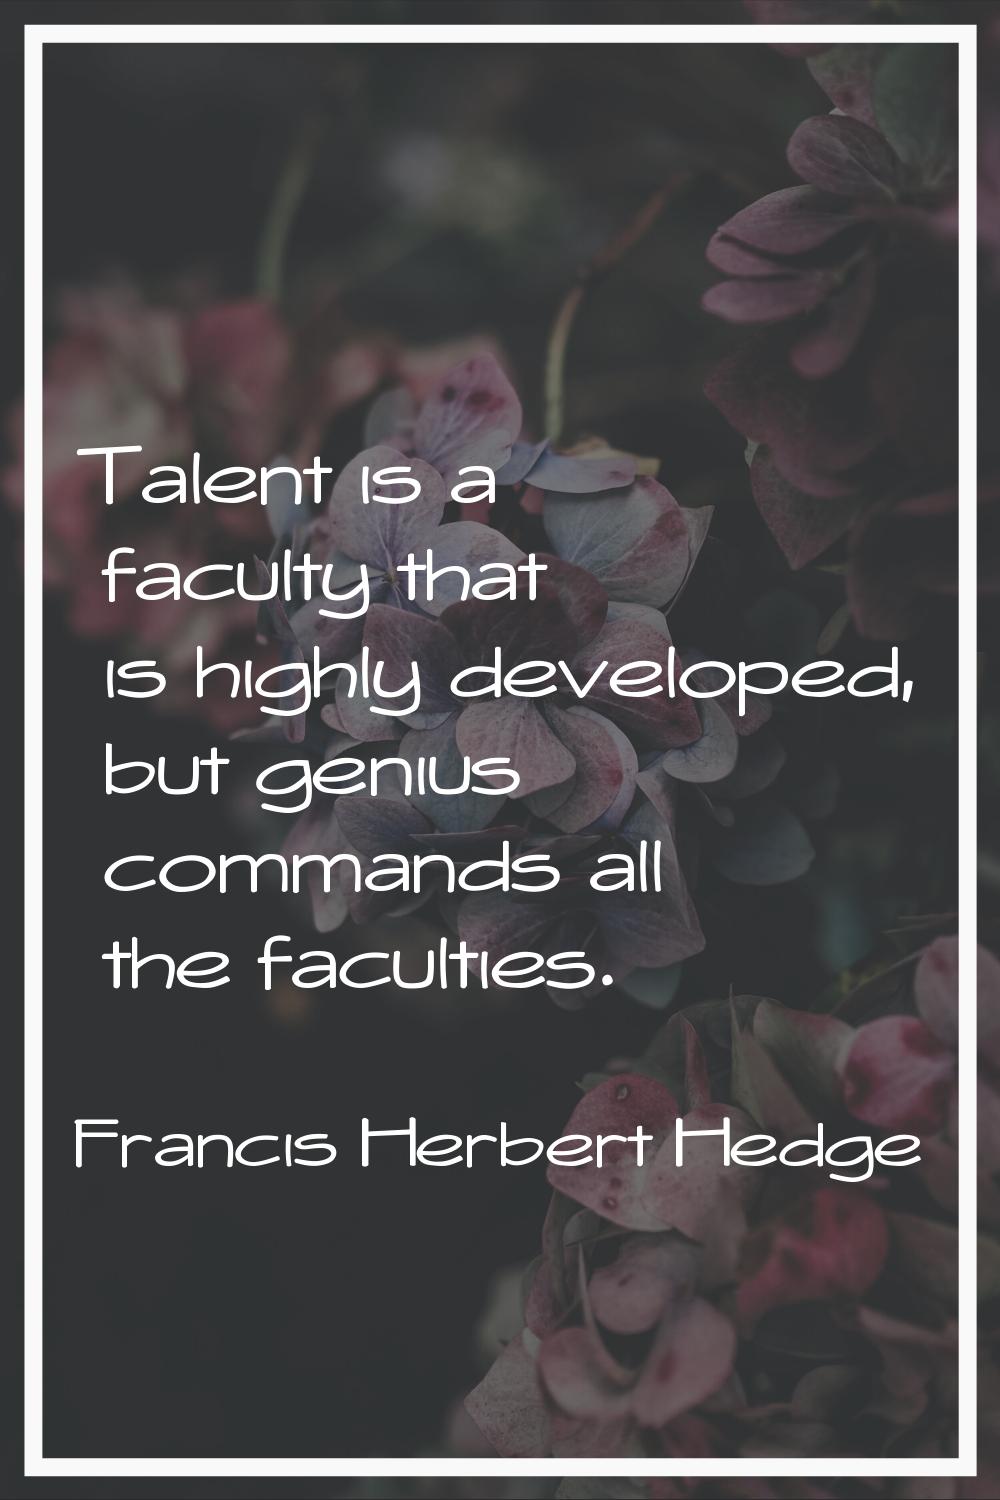 Talent is a faculty that is highly developed, but genius commands all the faculties.